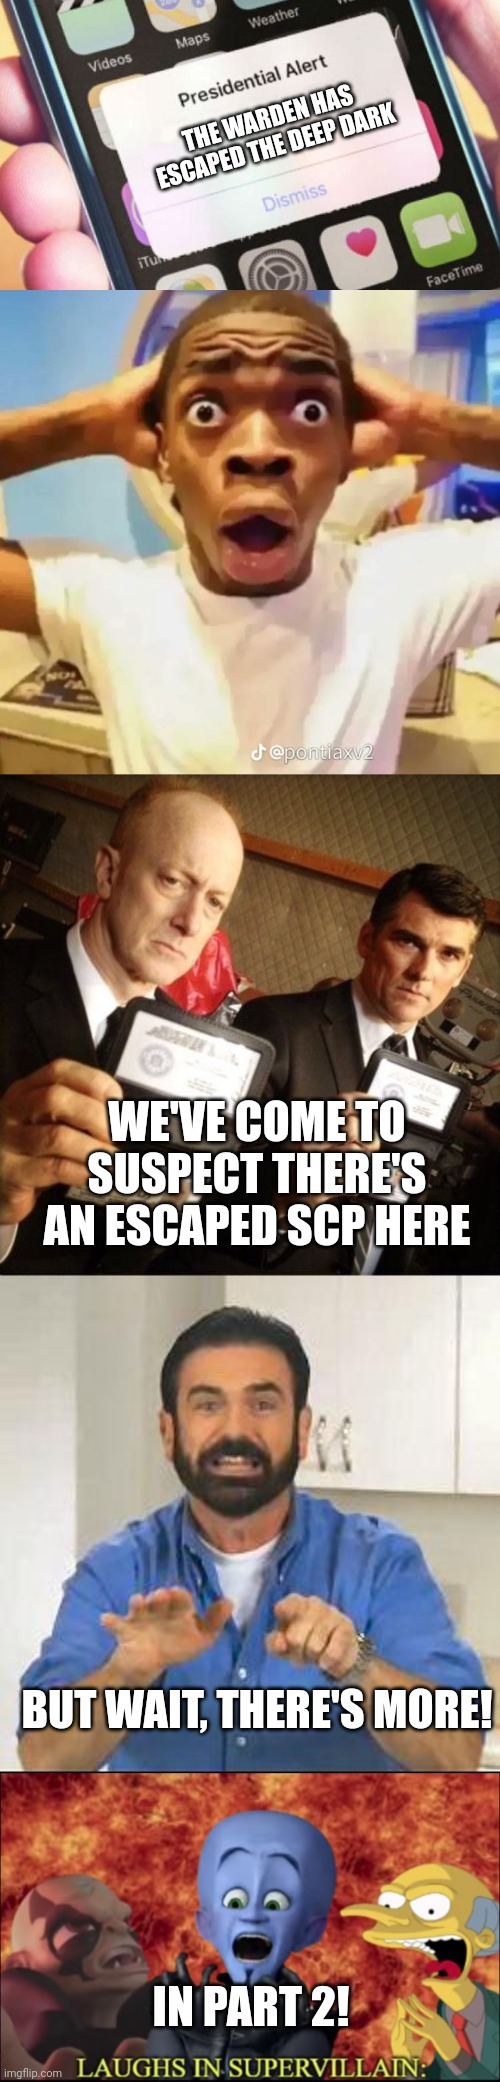 Part 1 escaped warden | THE WARDEN HAS ESCAPED THE DEEP DARK; WE'VE COME TO SUSPECT THERE'S AN ESCAPED SCP HERE; BUT WAIT, THERE'S MORE! IN PART 2! | image tagged in memes,presidential alert,shocked black guy,fbi,but wait there's more | made w/ Imgflip meme maker